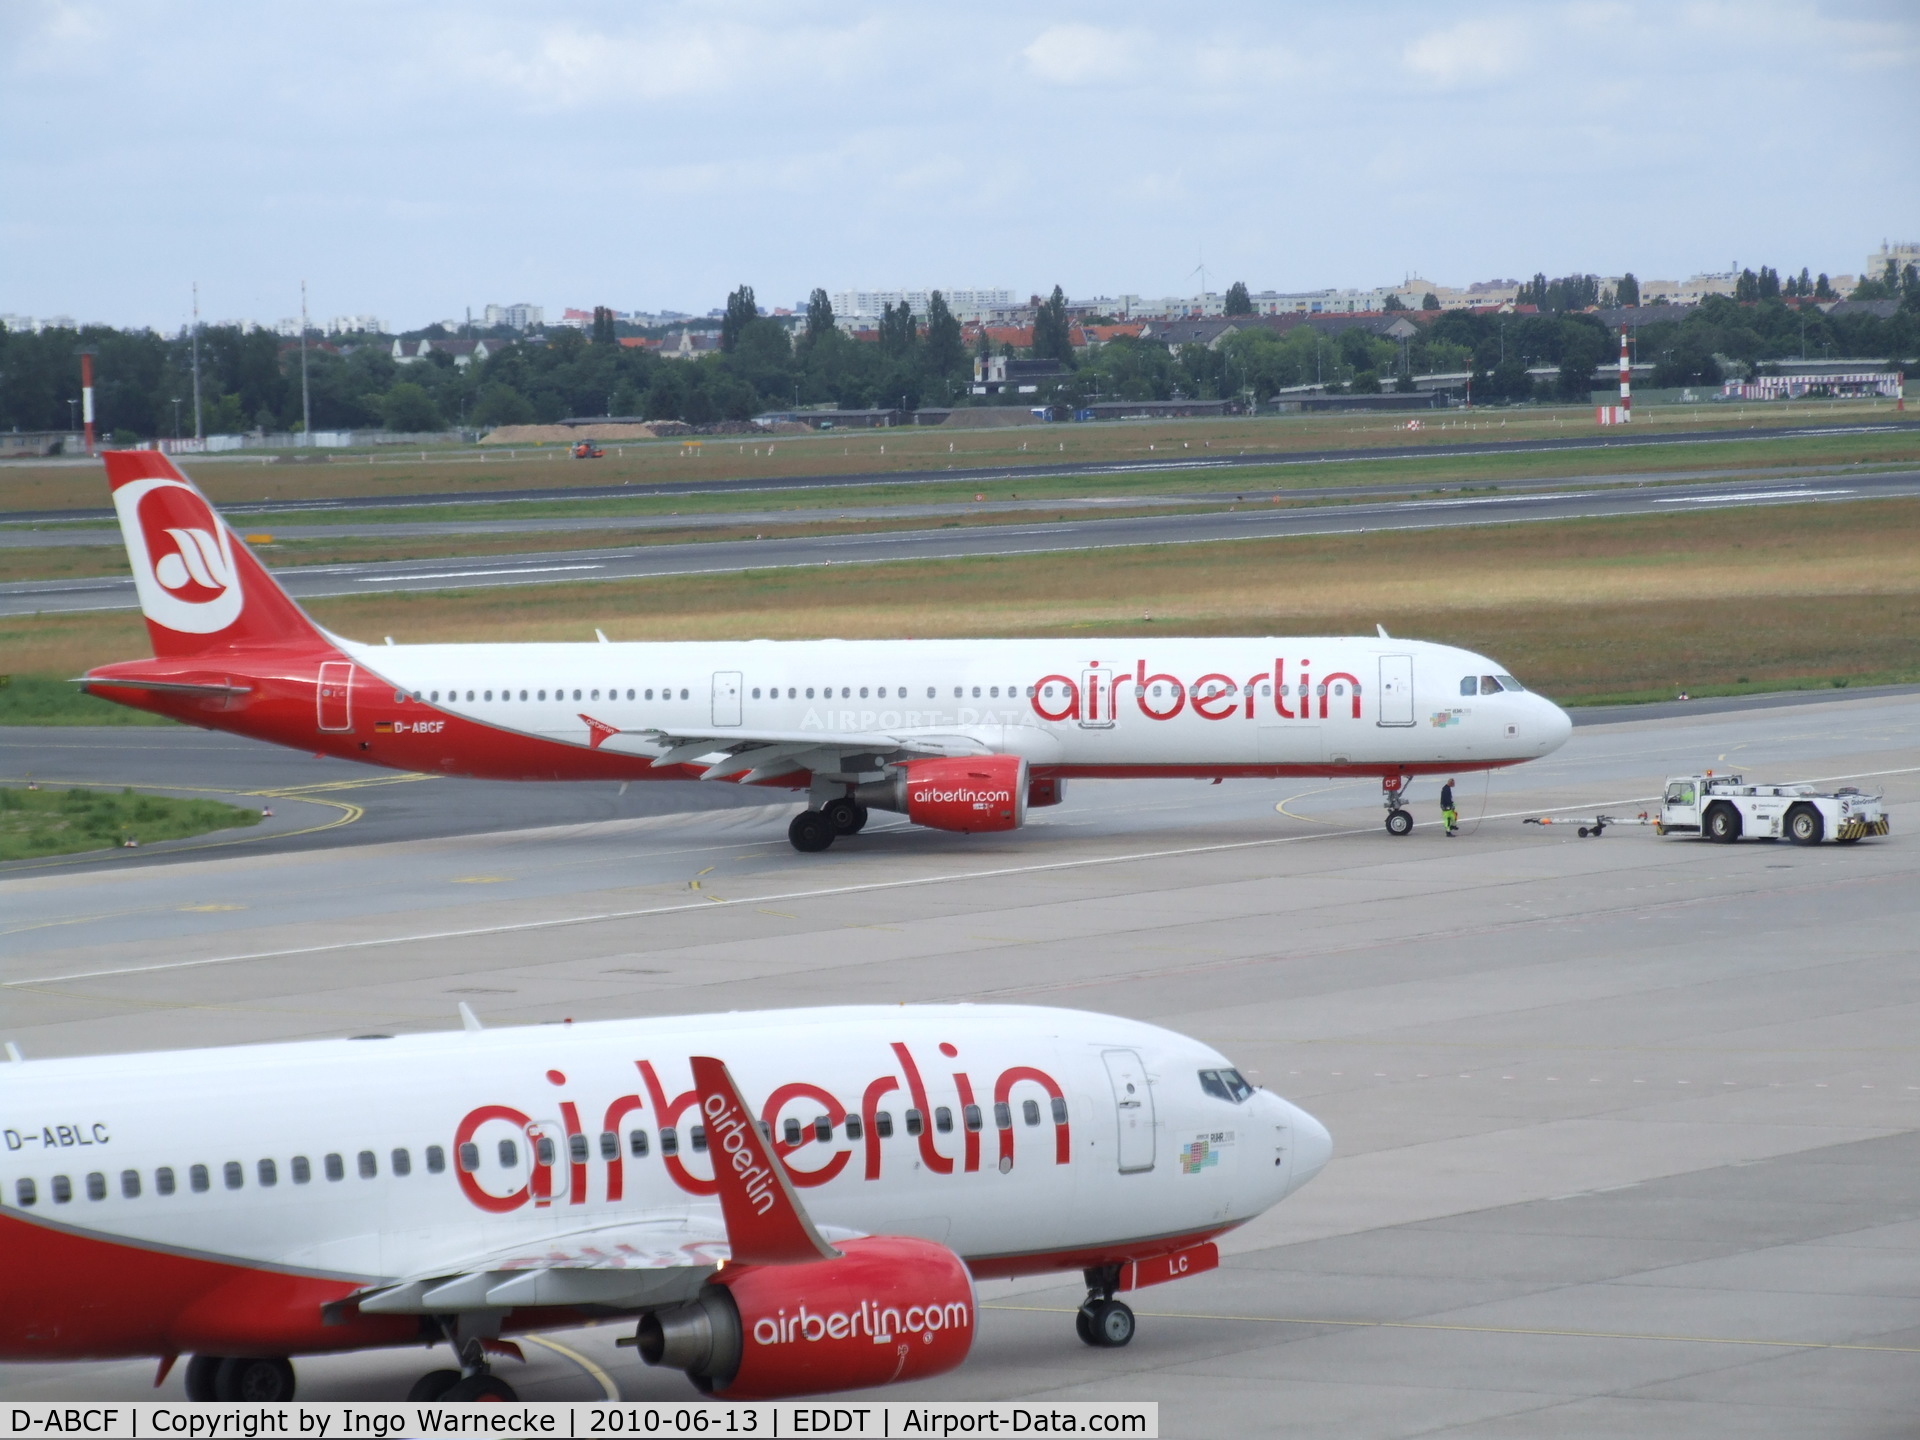 D-ABCF, 2003 Airbus A321-211 C/N 1966, Airbus A321-211 of airberlin at Berlin/Tegel airport